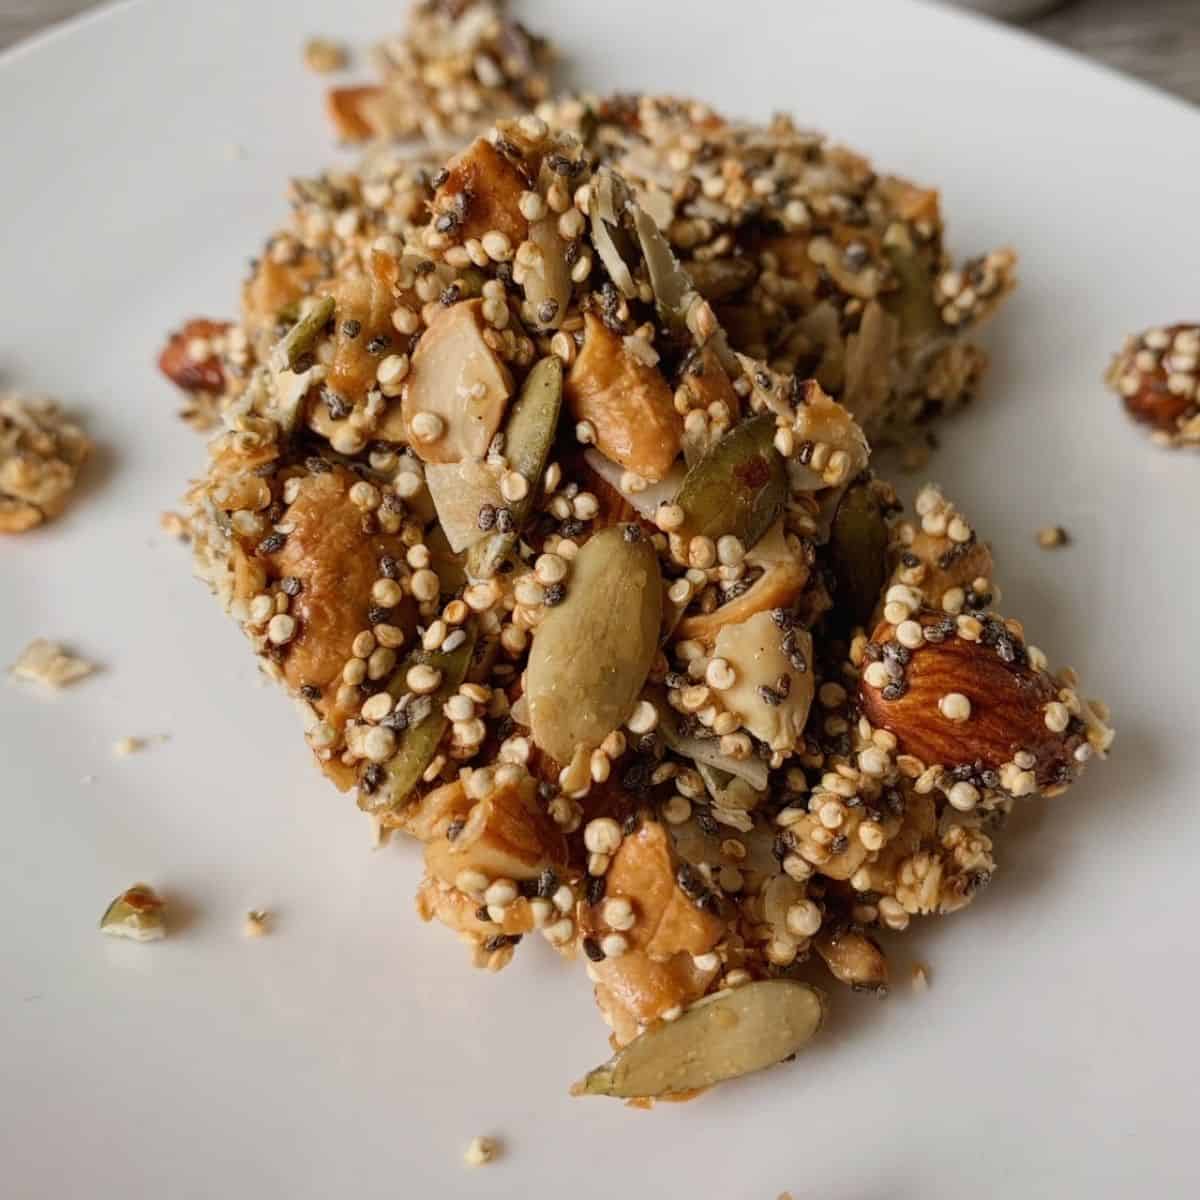 nut and seed granola bar on a plate